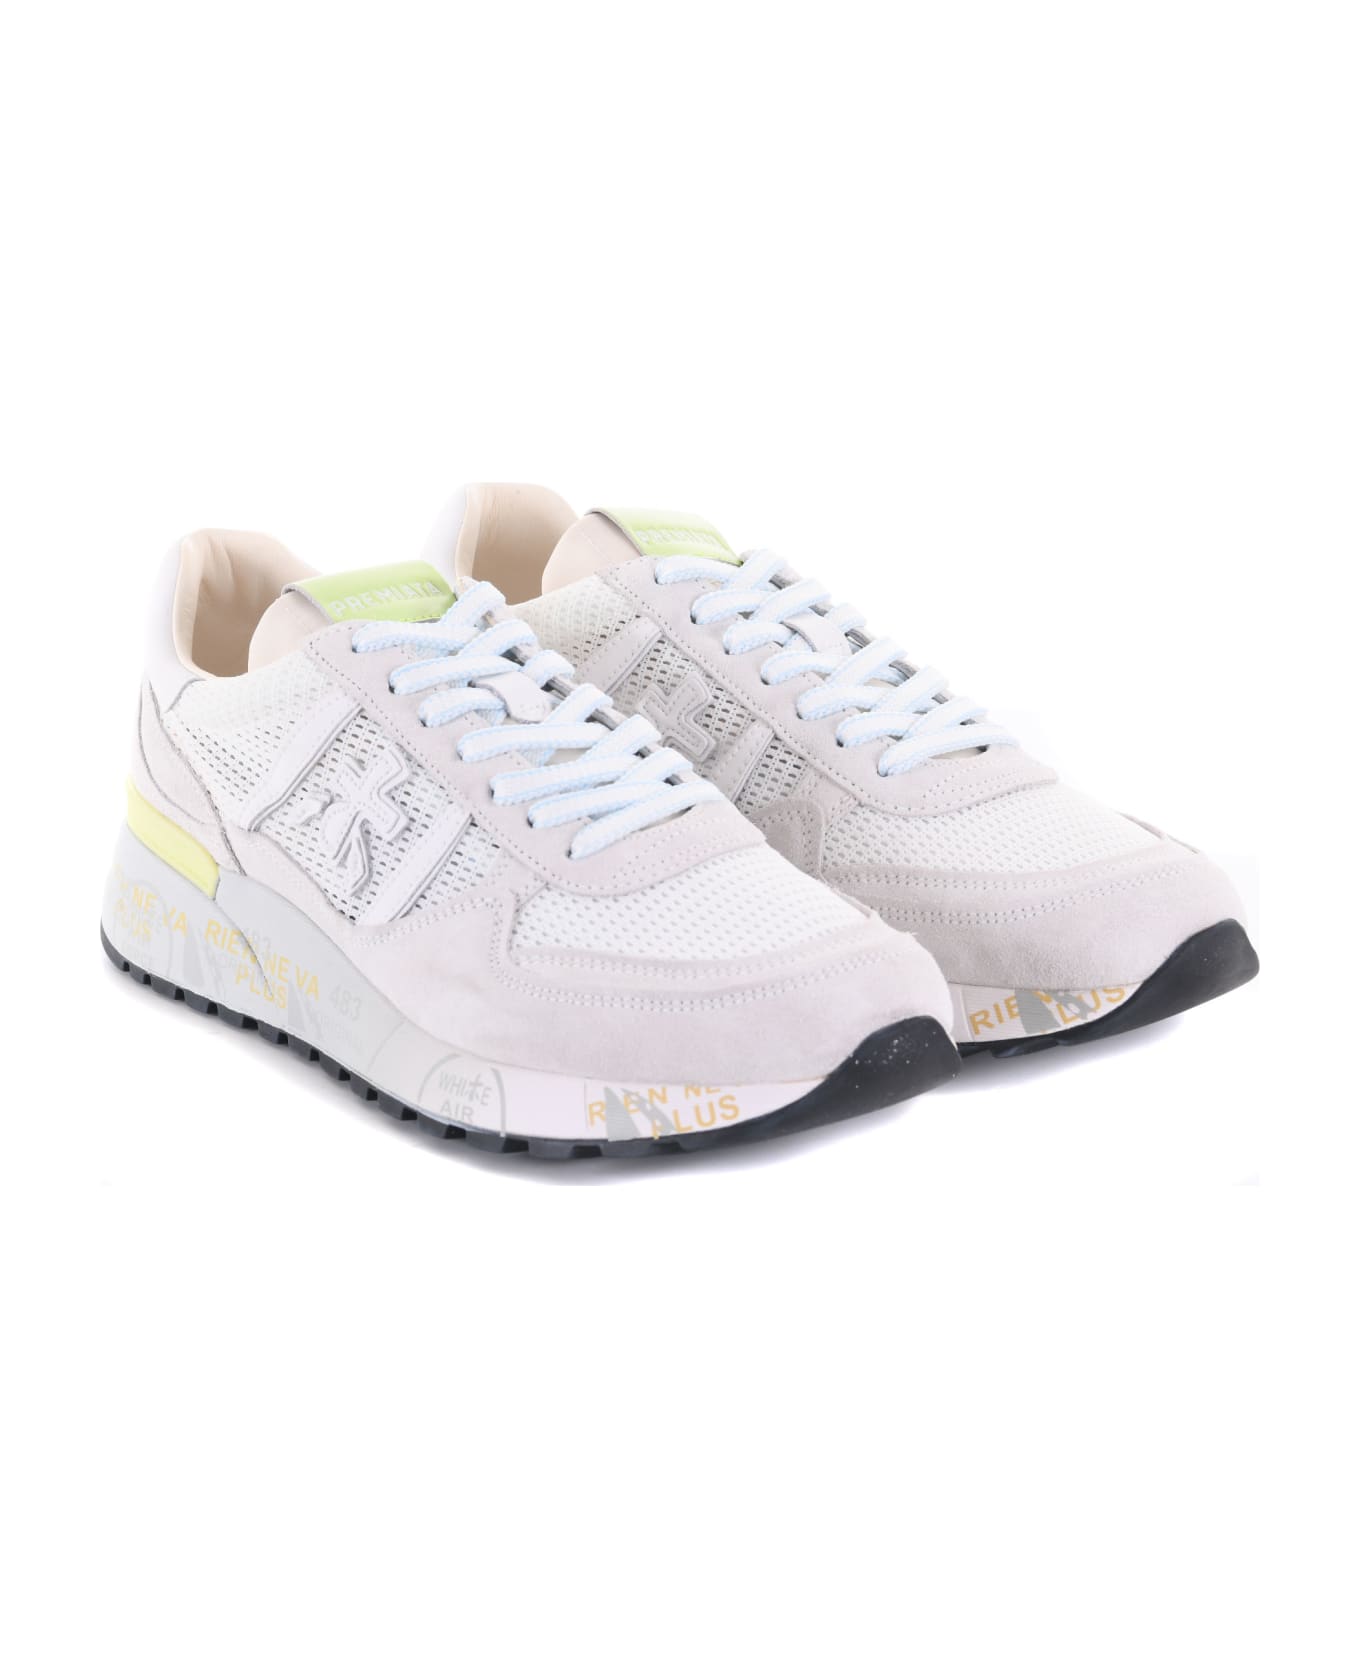 Premiata Sneakers In Suede And Perforated Mesh Scafati Store Available - Ghiaccio/bianco スニーカー